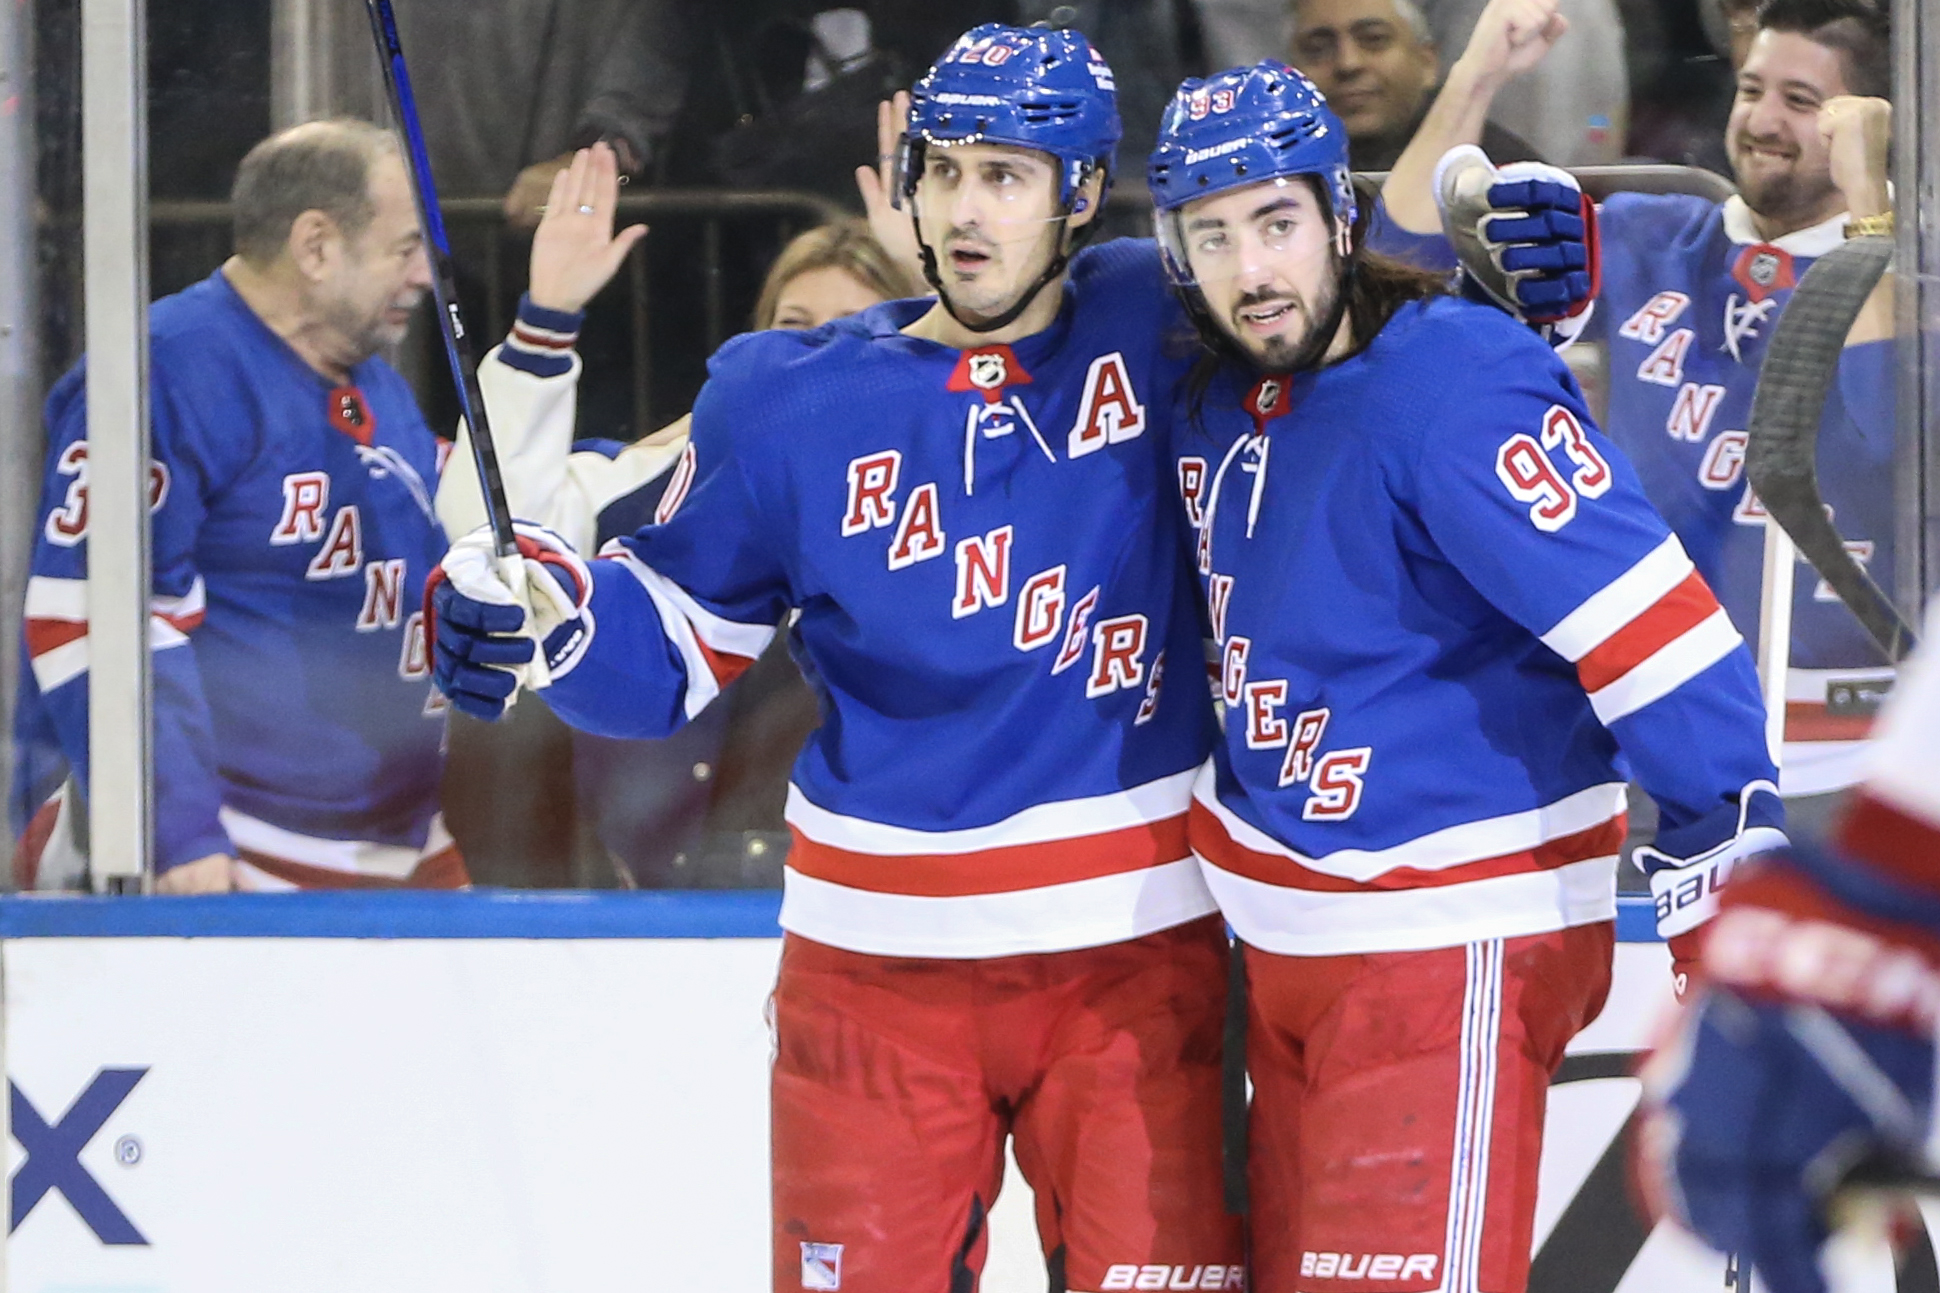 New York Rangers left wing Chris Kreider (20) celebrates with center Mika Zibanejad (93) after scoring a goal in the second period against the Montreal Canadiens at Madison Square Garden